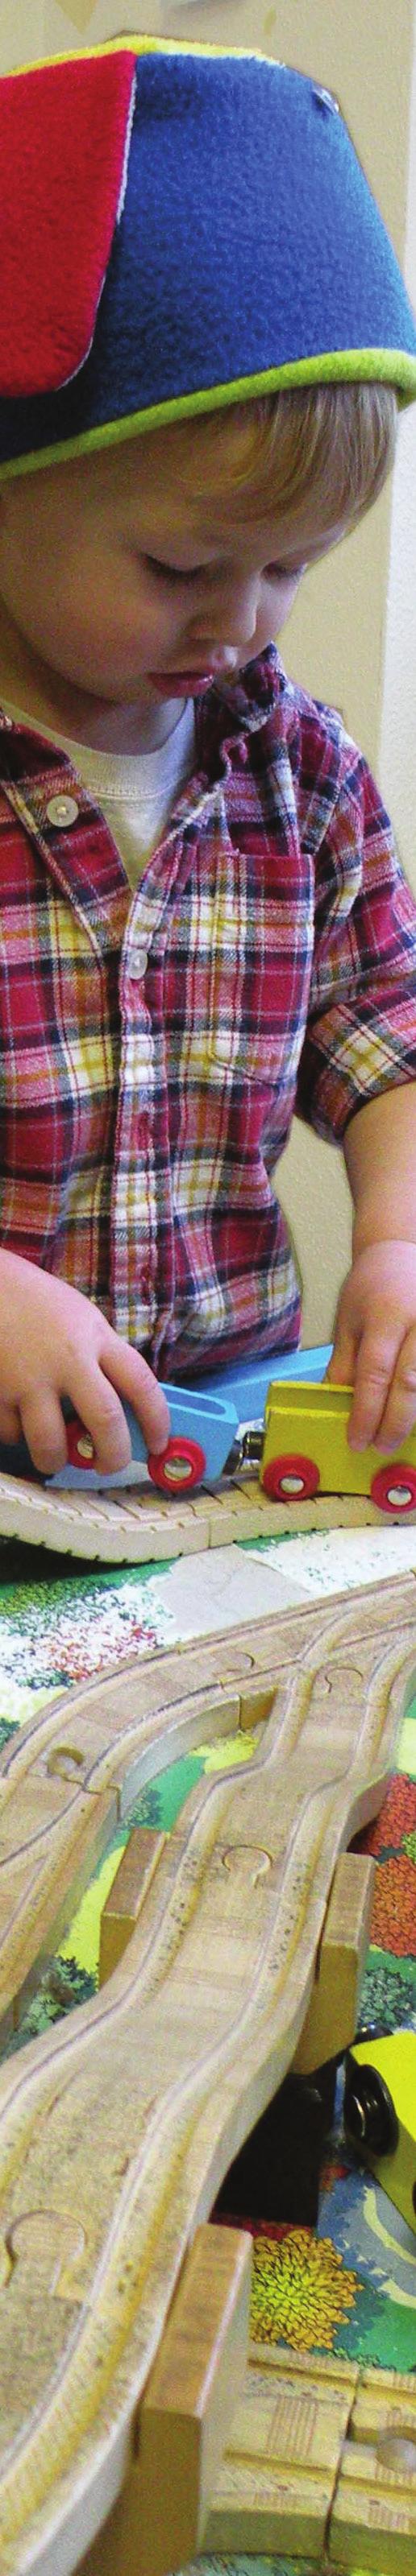 Why Early Childhood? (Teacher Education and Compensation Helps) plays a vital role in improving the quality of early care and education for New Mexico s youngest children.